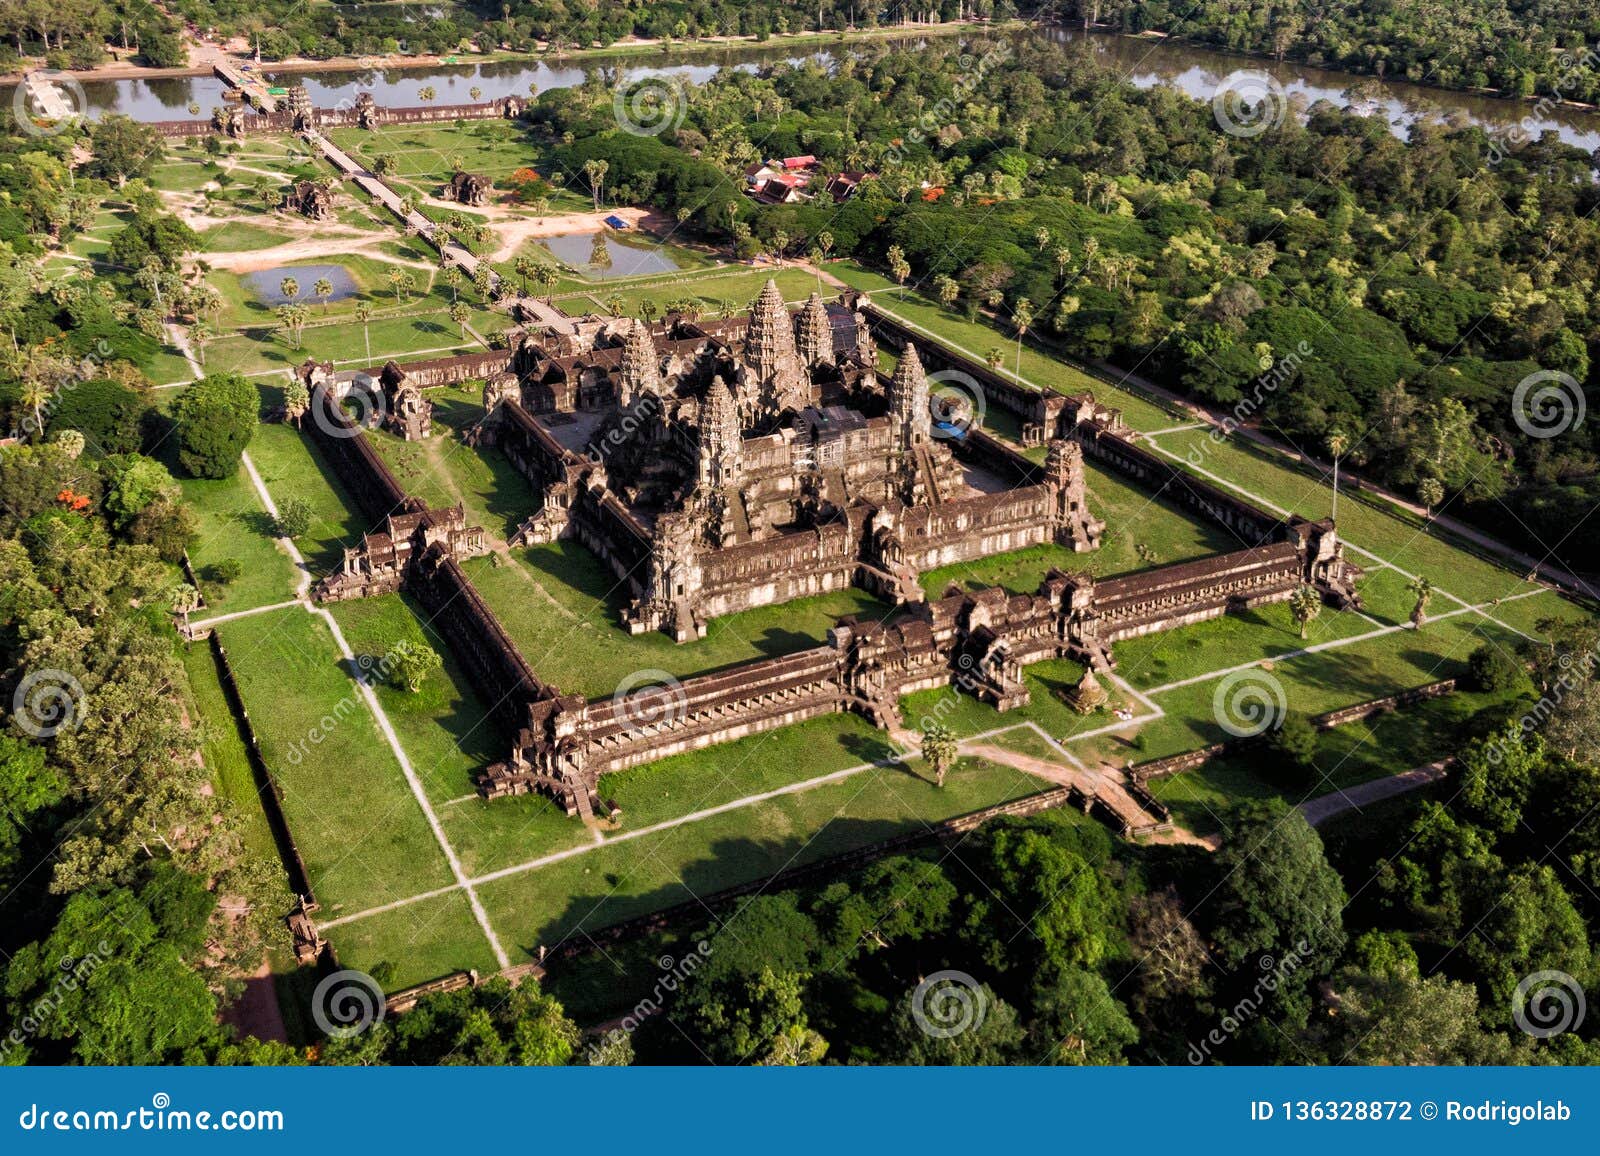 aerial view of angkor wat temple, siem reap, cambodia